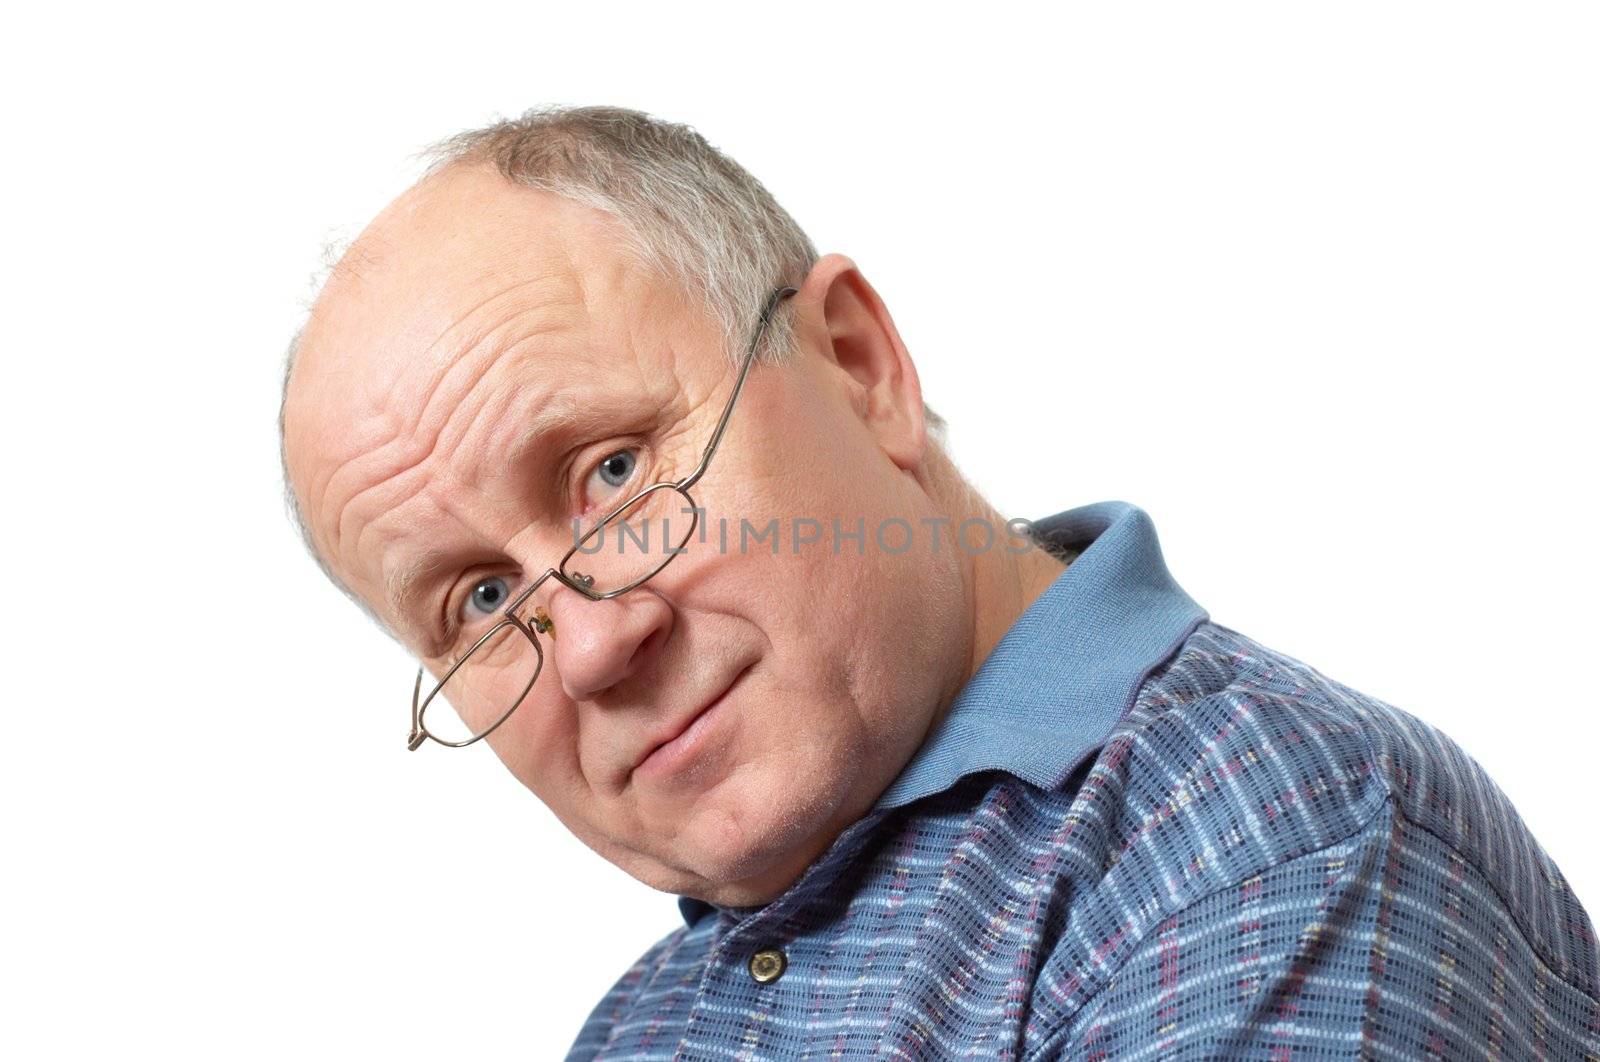 Bald senior man with glasses. Emotional portraits series. Isolated on white.